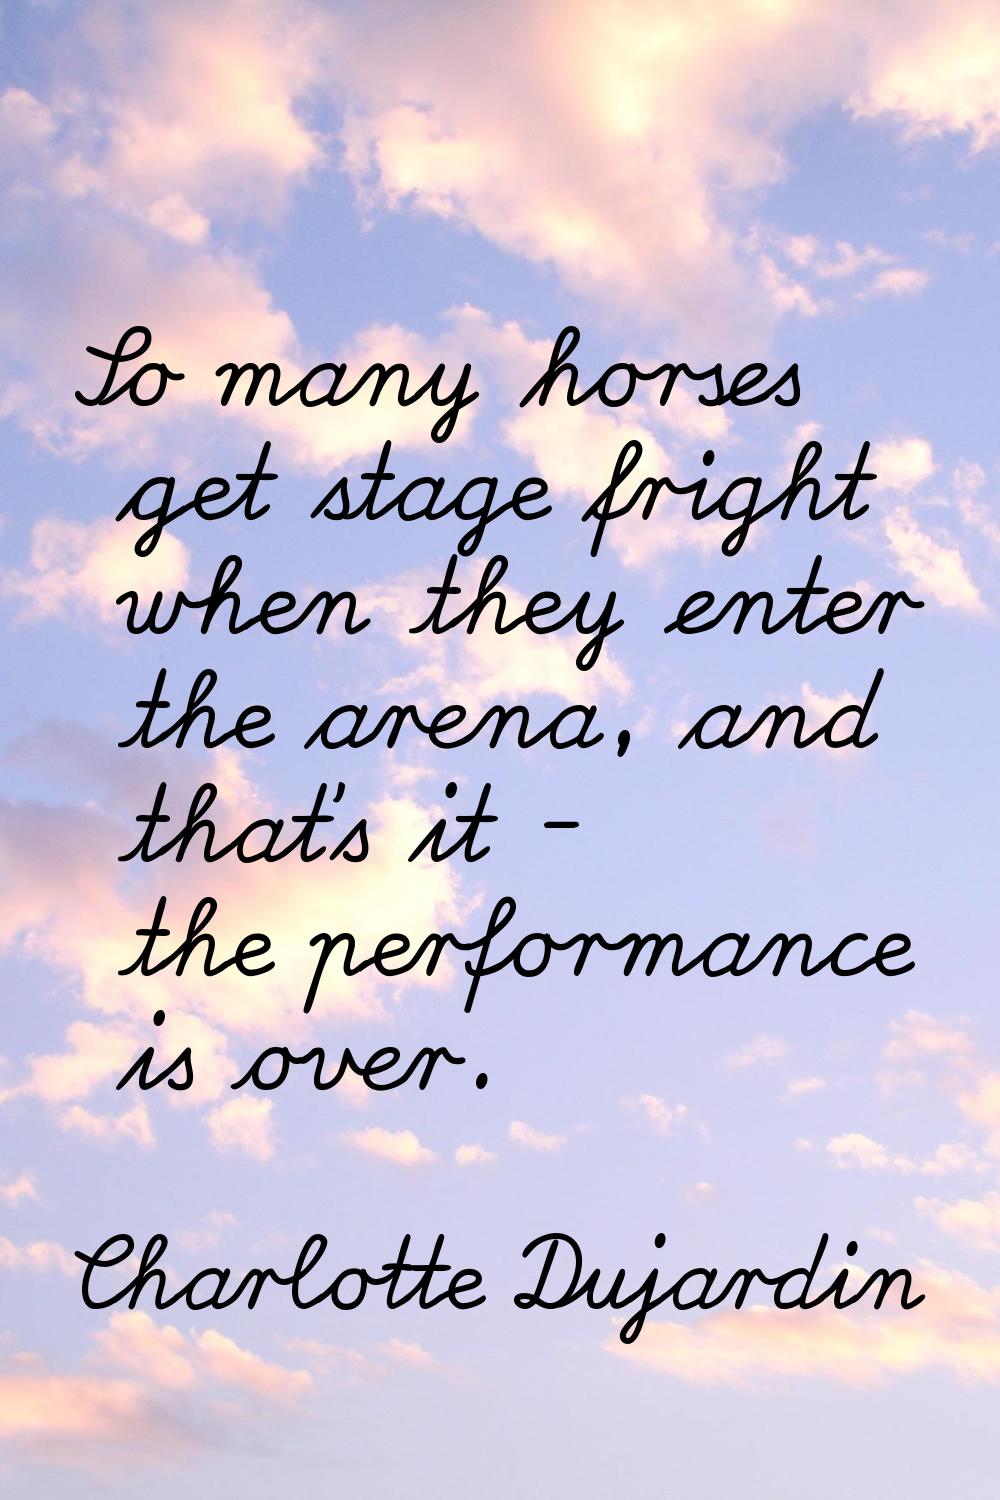 So many horses get stage fright when they enter the arena, and that's it - the performance is over.